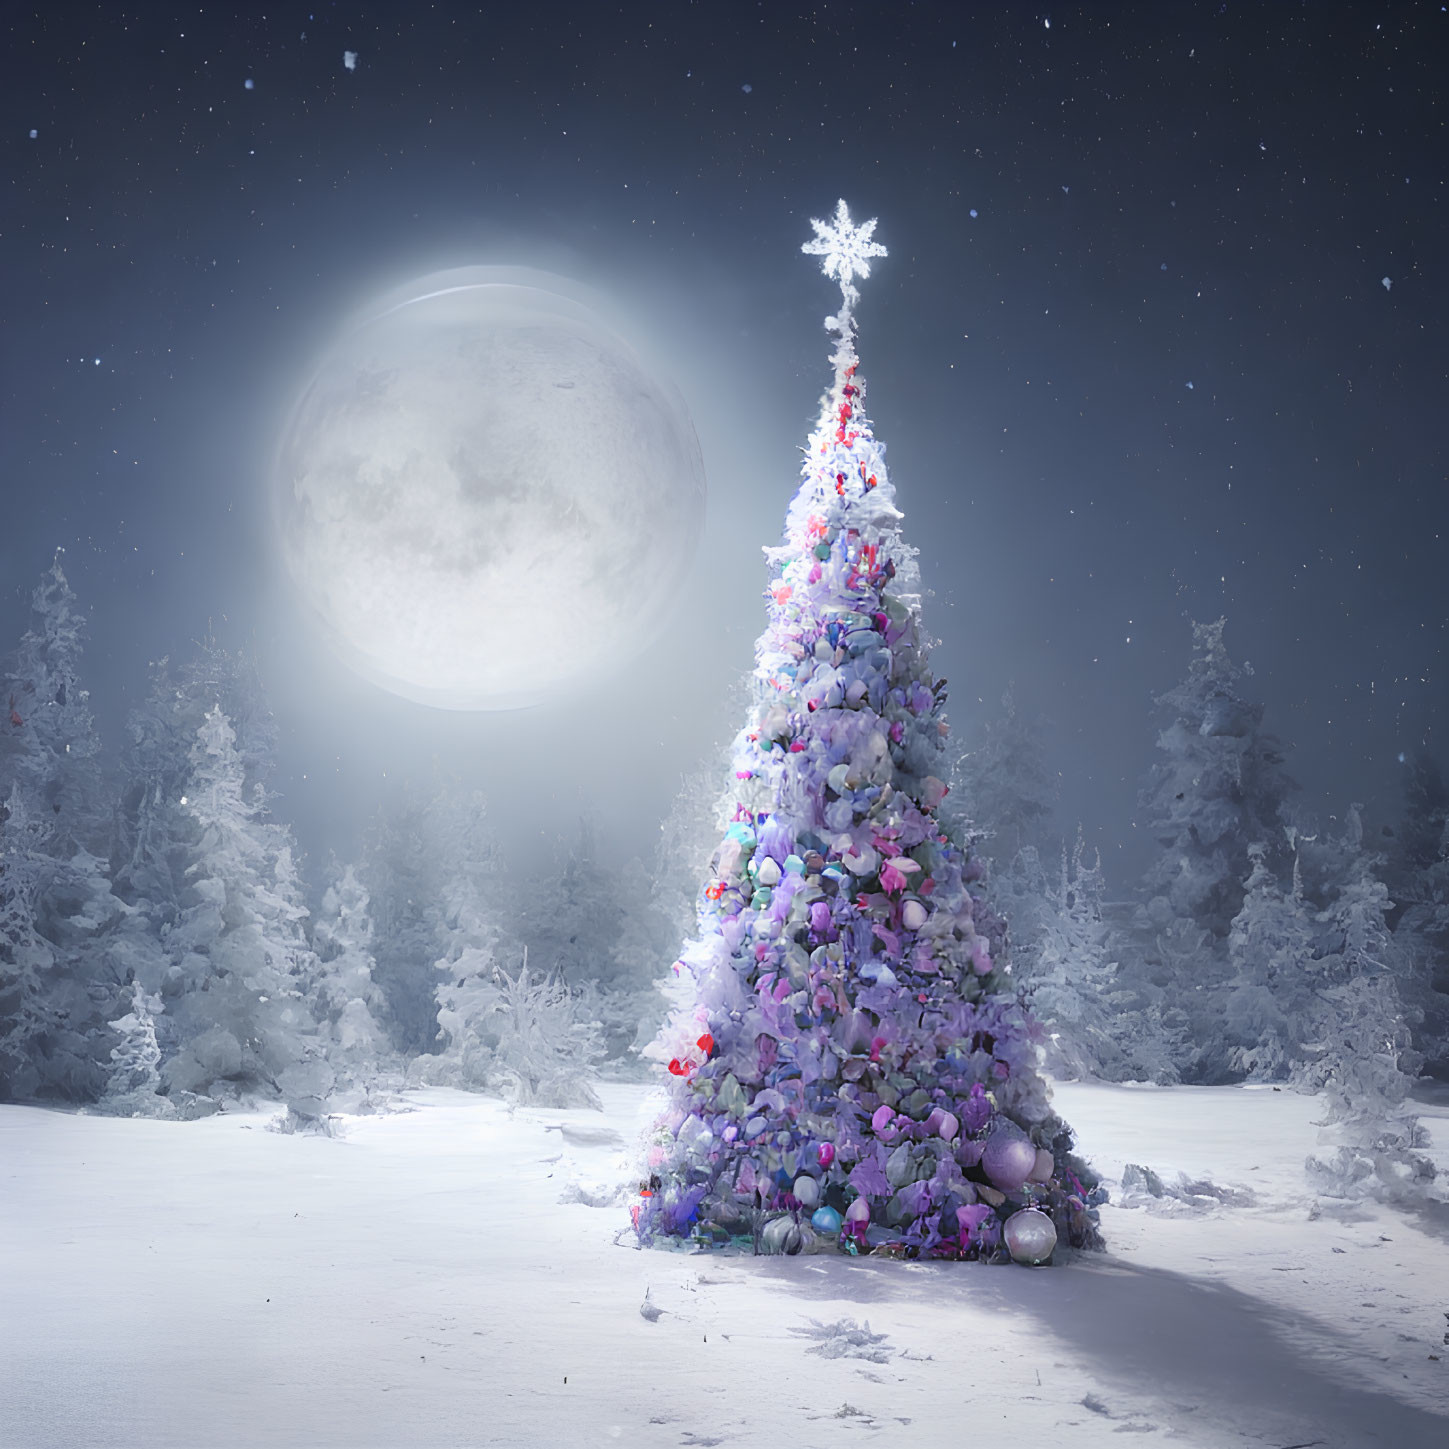 Decorated Christmas tree under full moon in snowy landscape